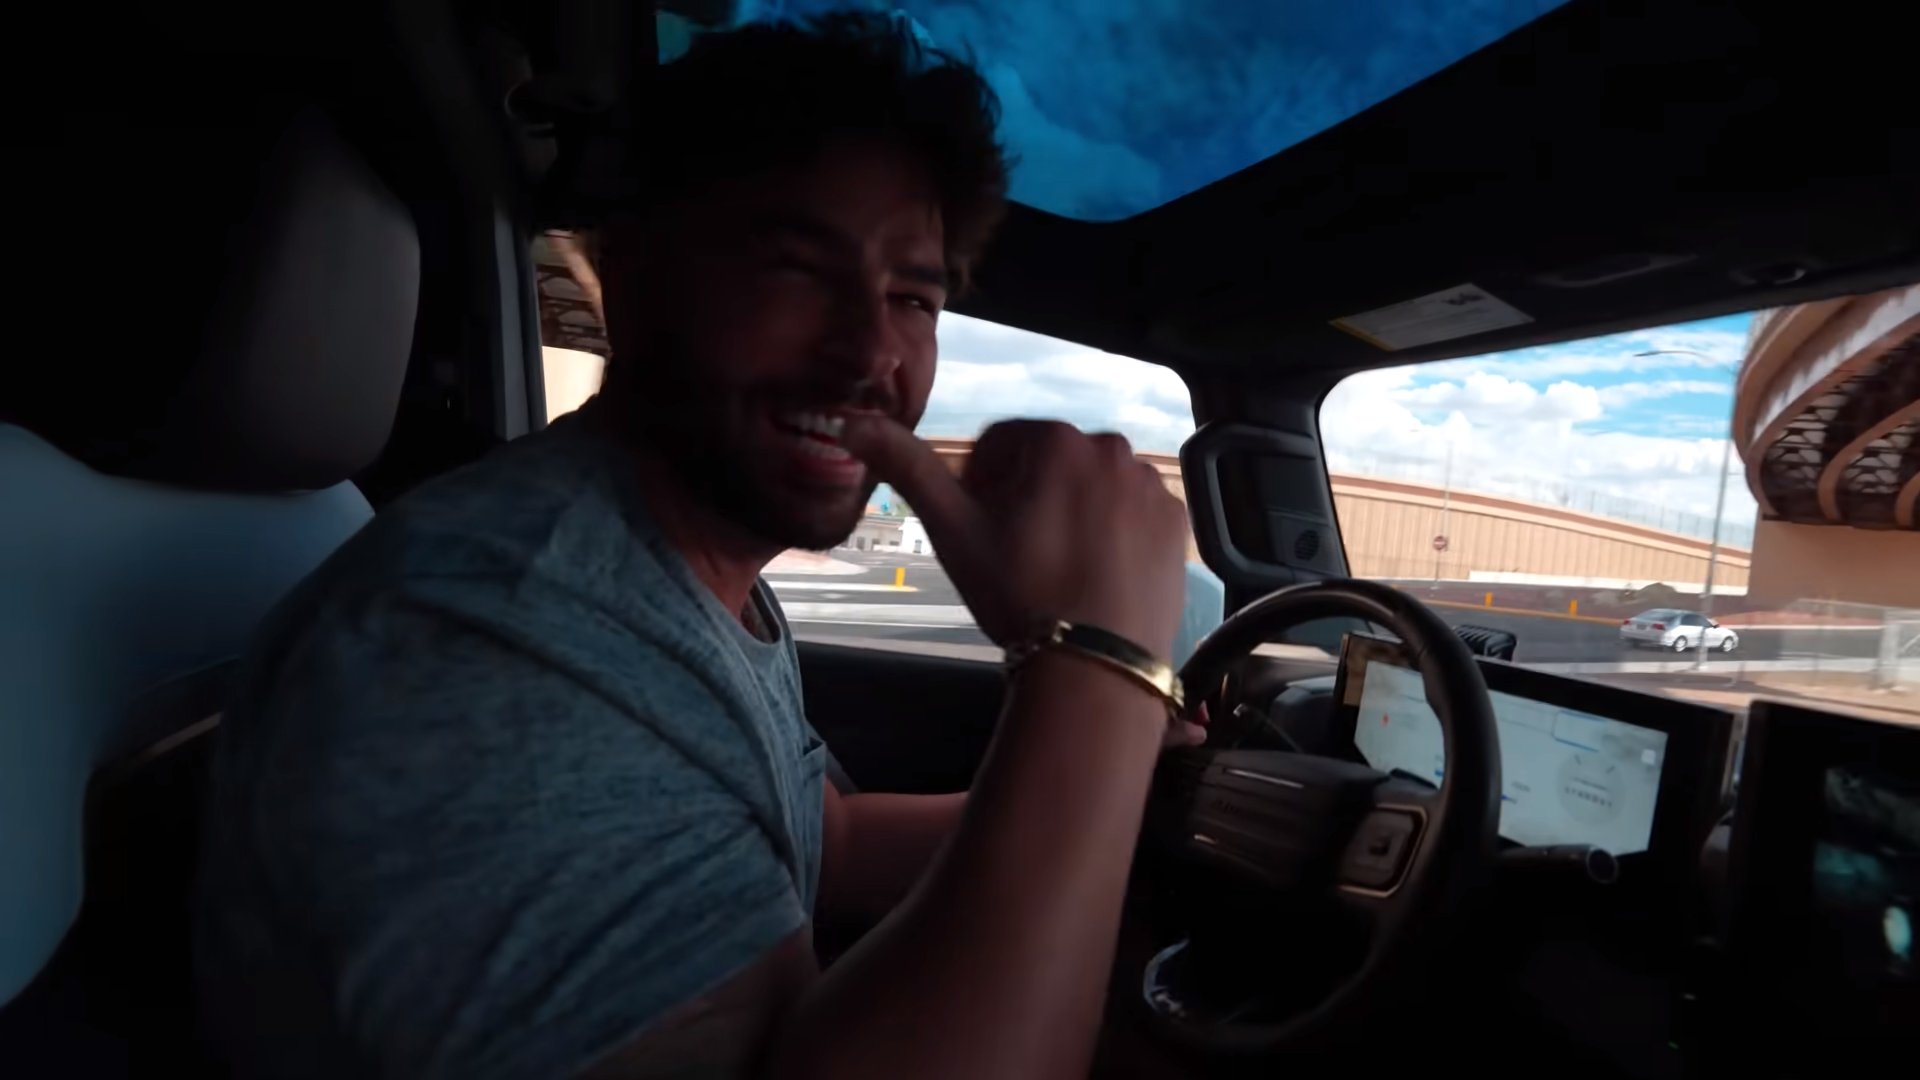 watch youtuber totals brand new gmc hummer ev the first day he drives it 3